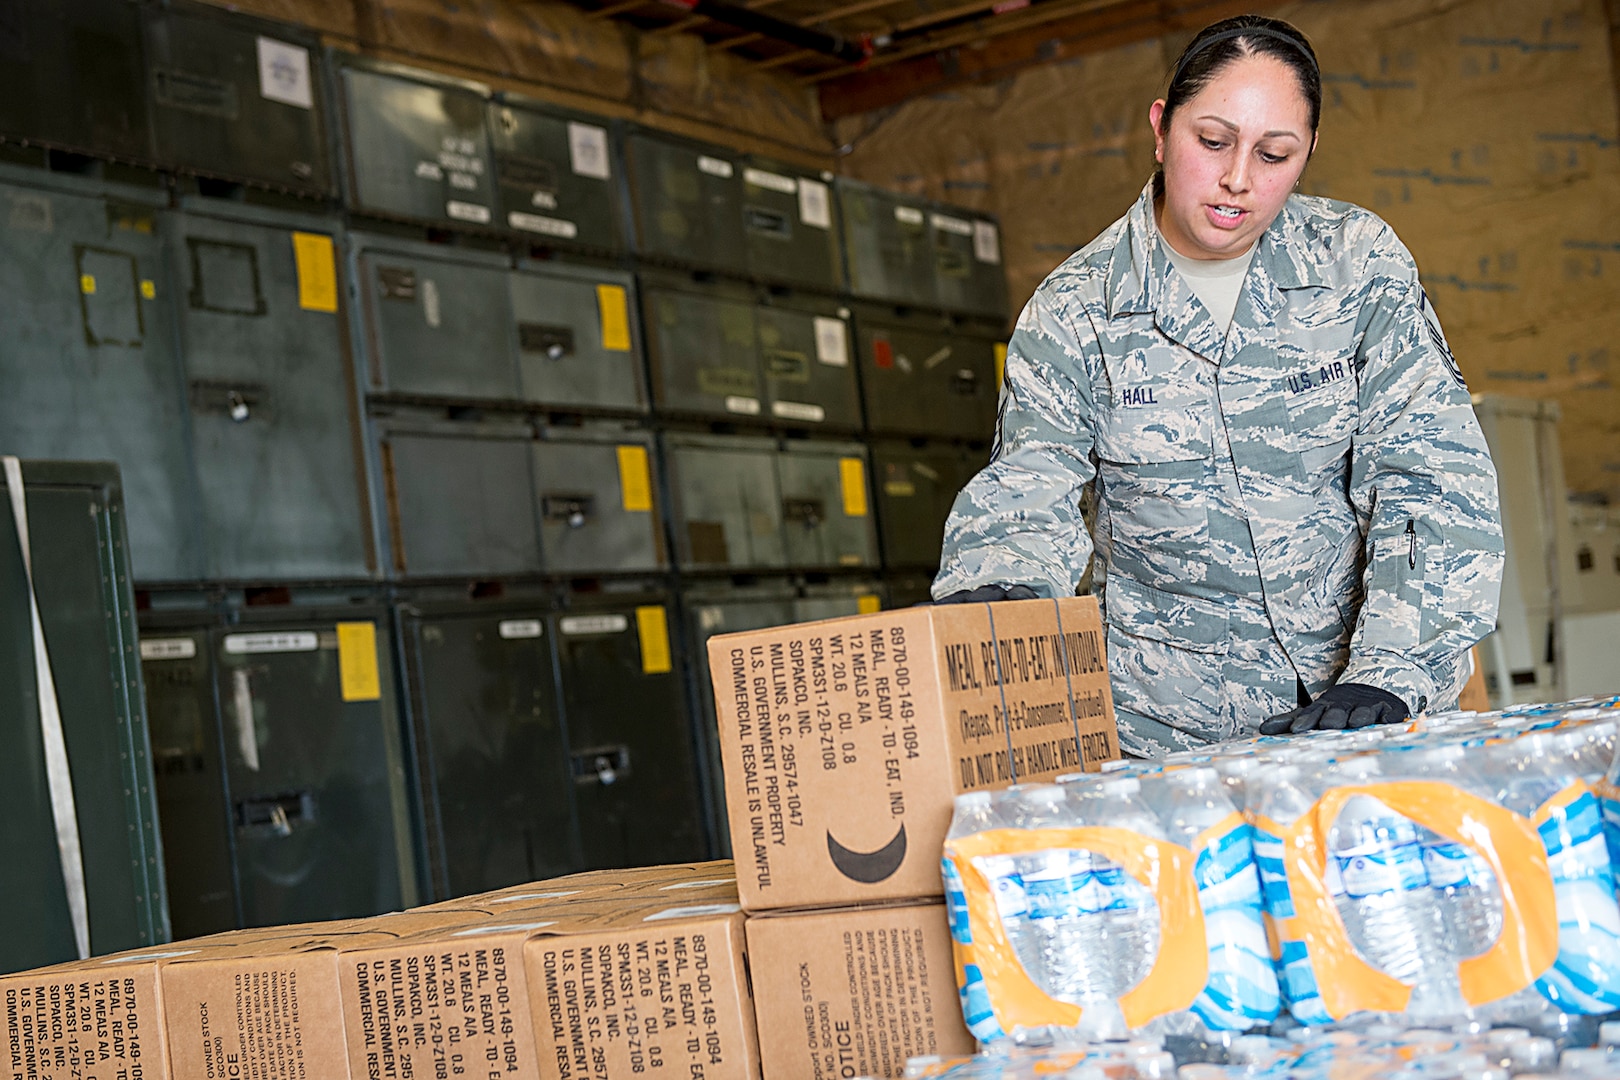 Master Sgt. Angie Hall, 434th Logistics Readiness Squadron combat readiness technician, palletizes water and meals ready to eat at Grissom Air Reserve Base, Ind., Sept. 11, 2017. The cargo is being prepared for shipment to Florida as part of Hurricane Irma relief efforts. (U.S. Air Force photo/Douglas Hays)